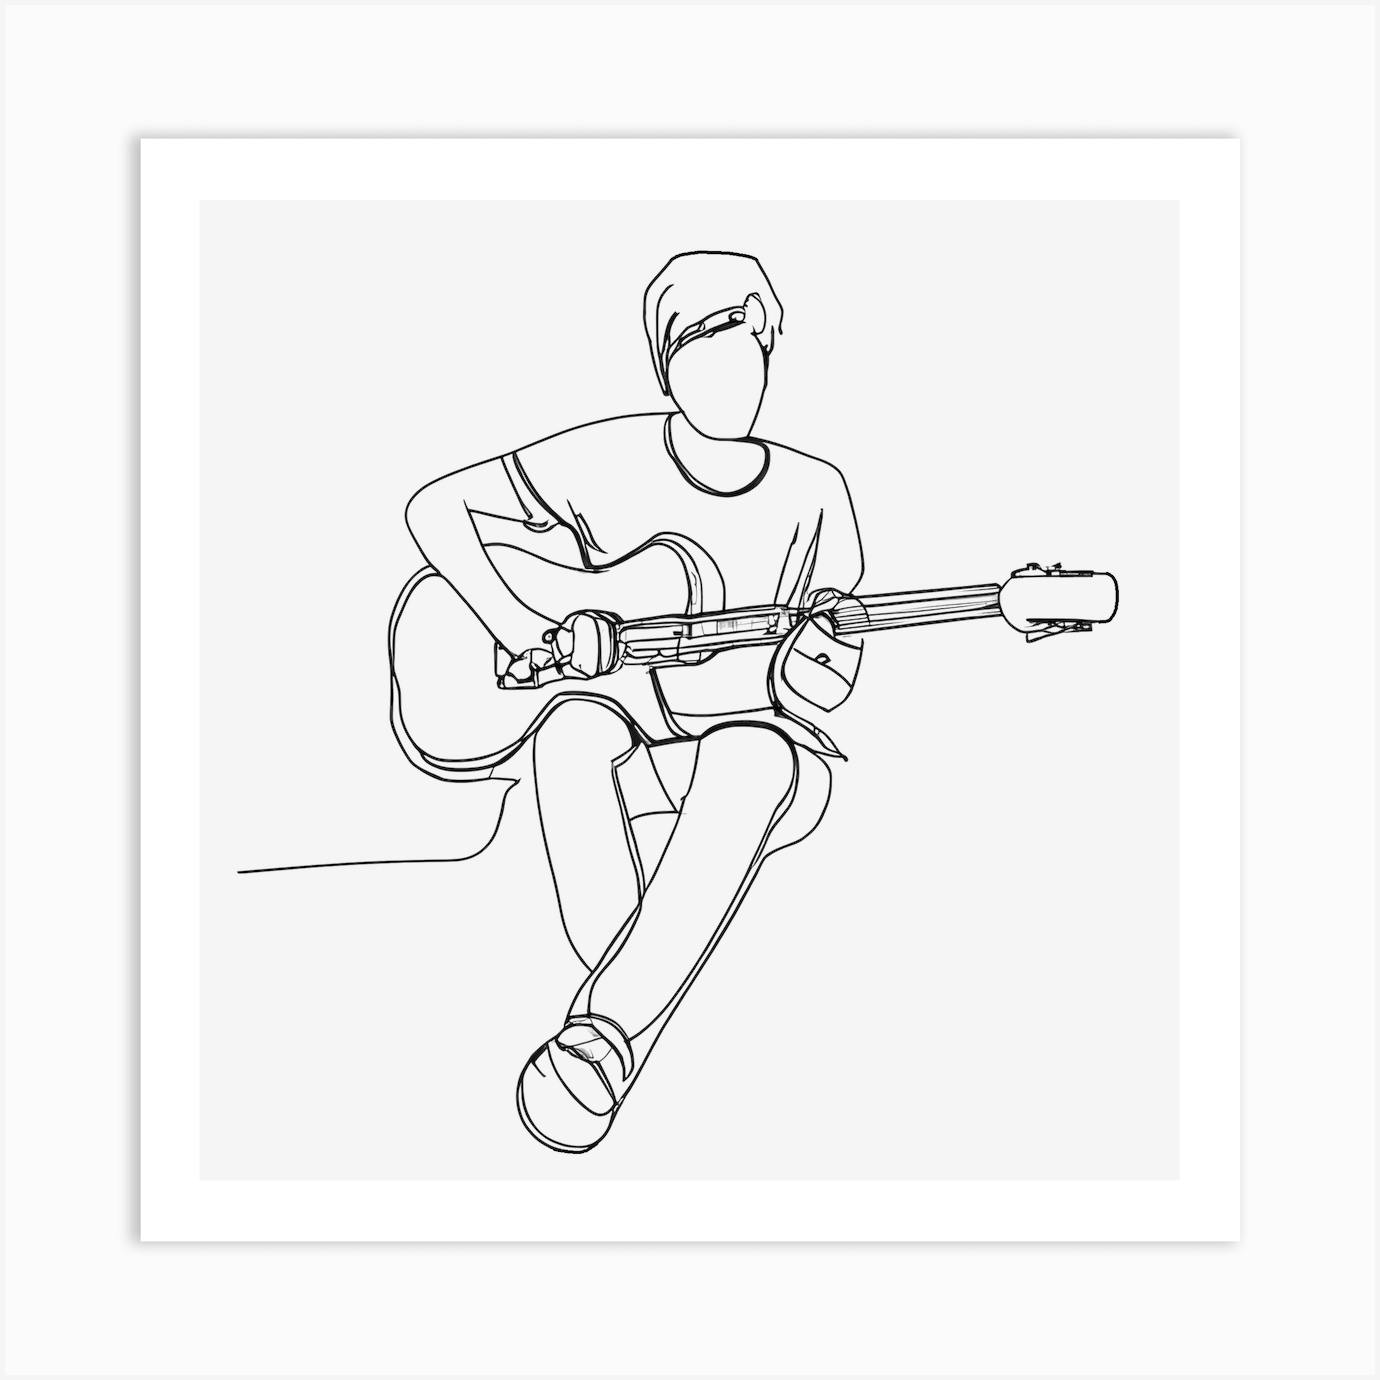 Man with an electric guitar sketch Royalty Free Vector Image